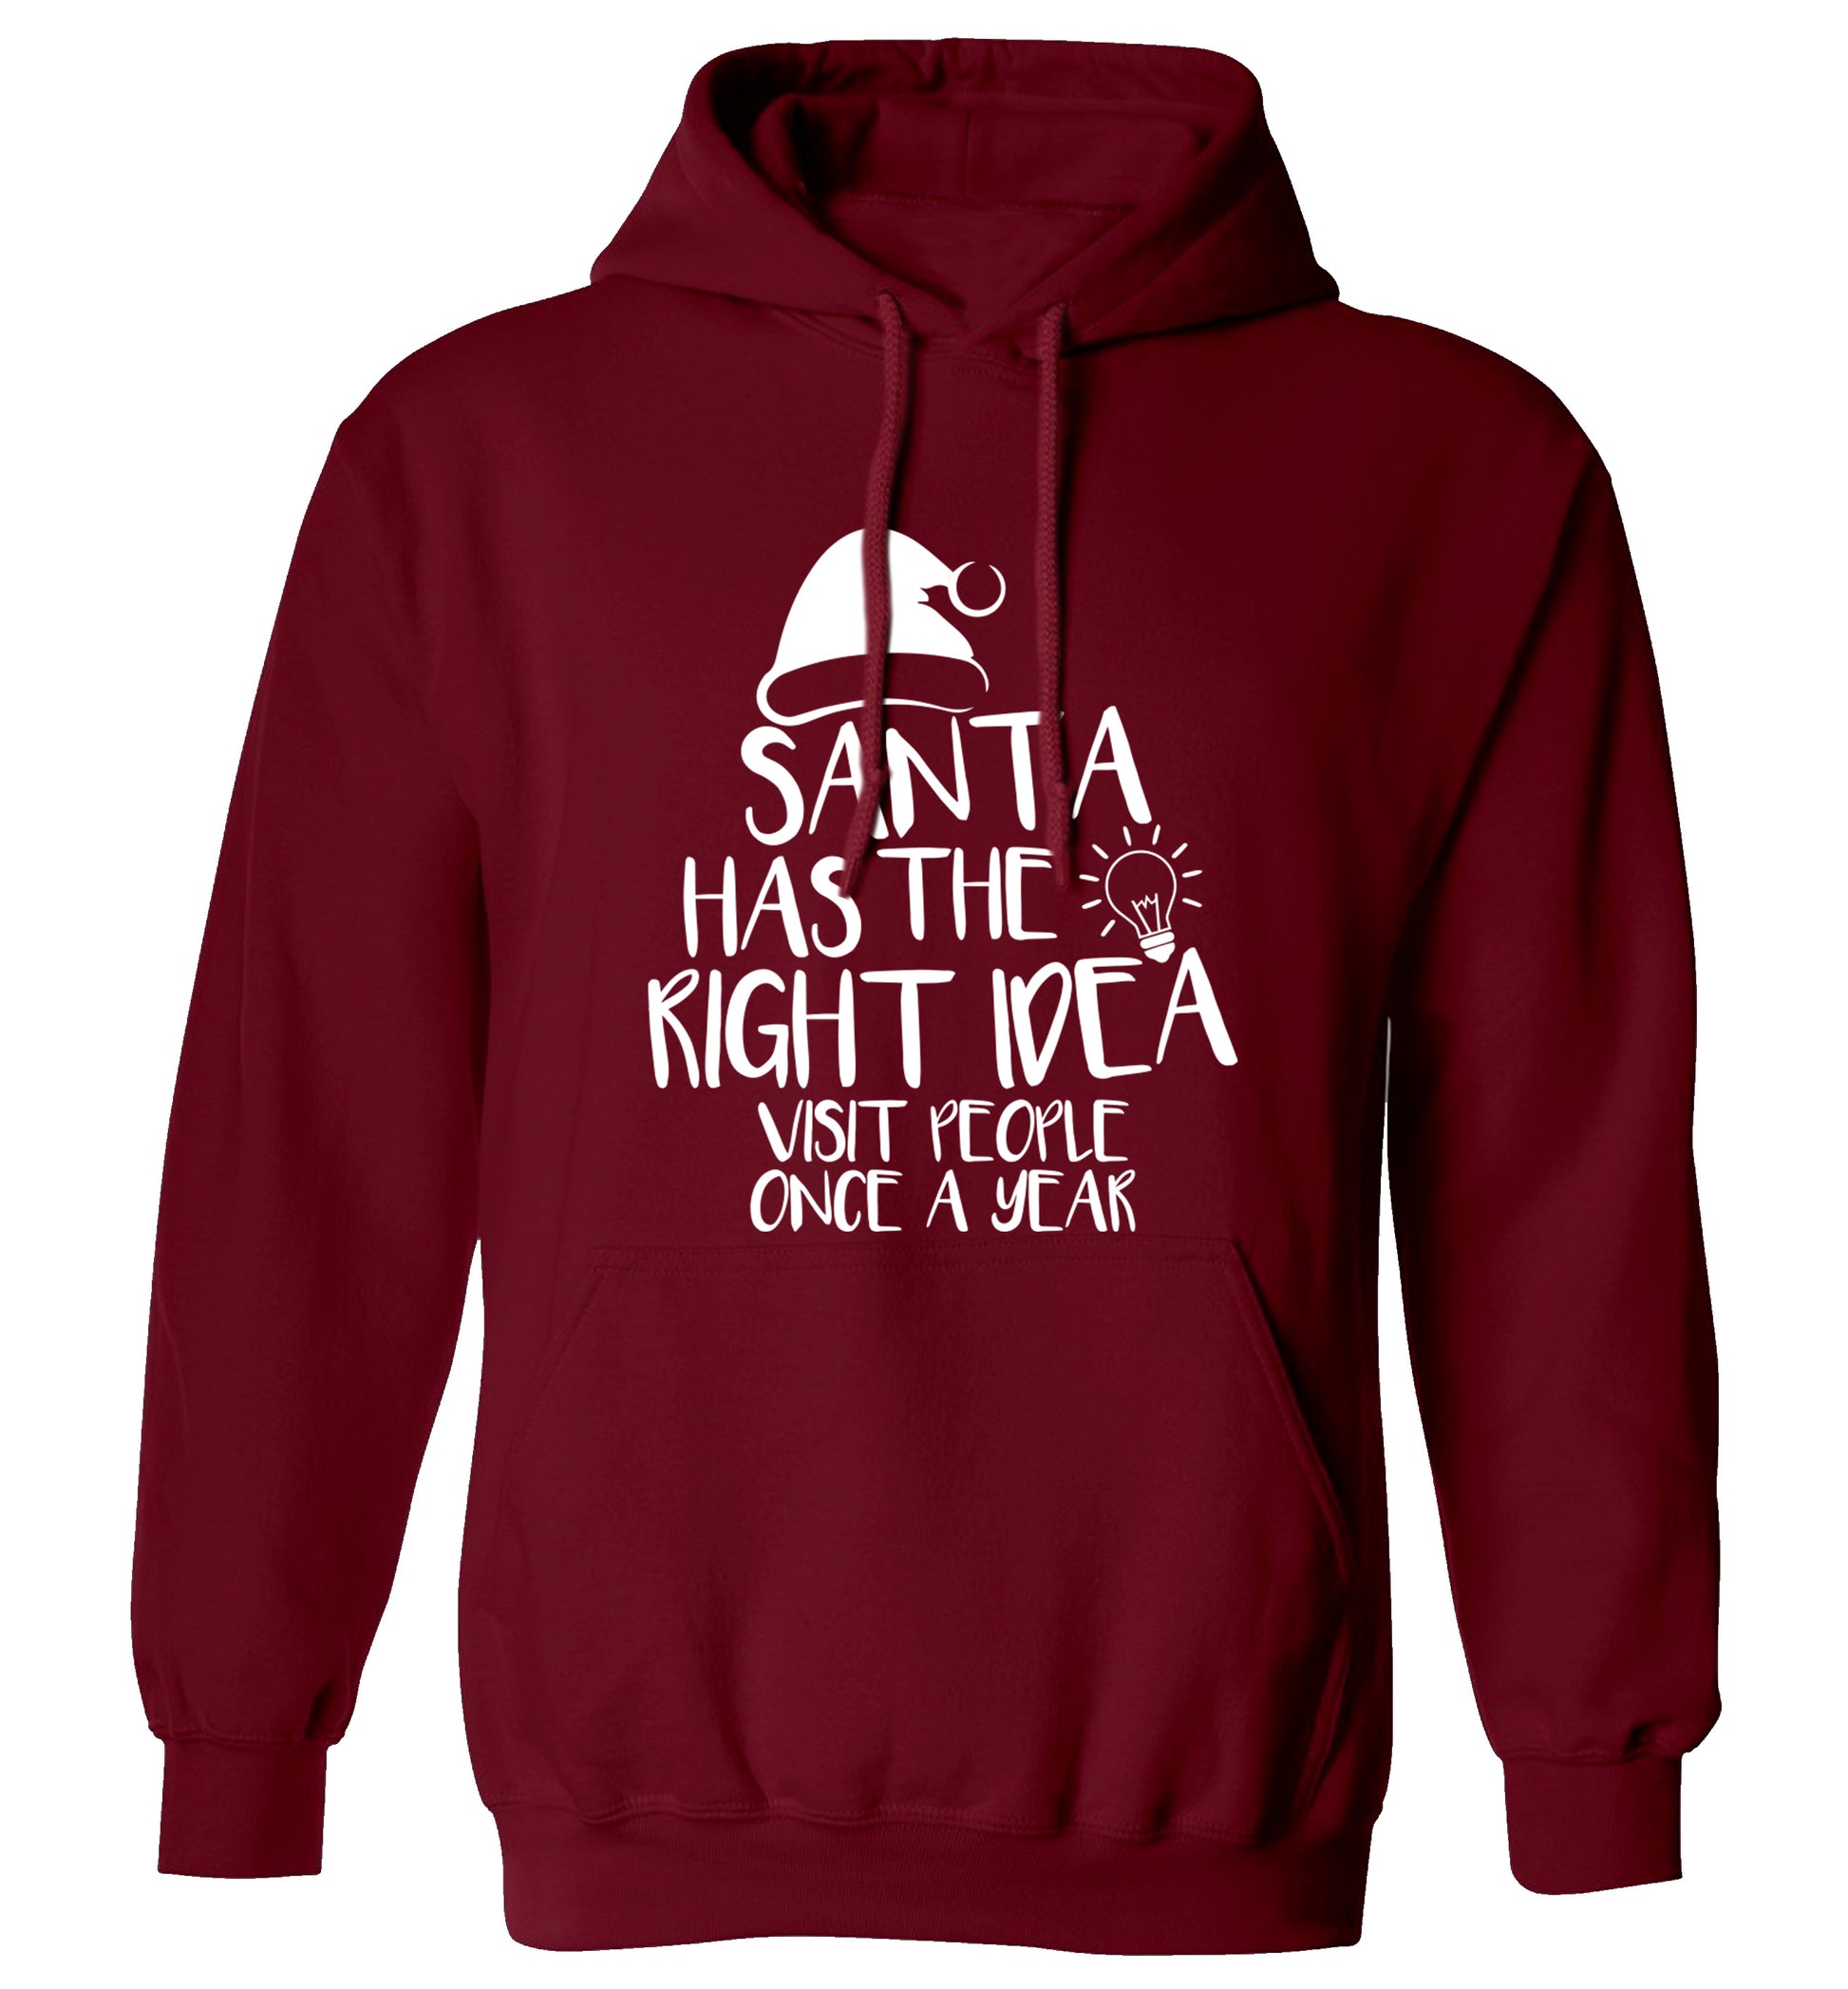 Santa has the right idea visit people once a year adults unisex maroon hoodie 2XL